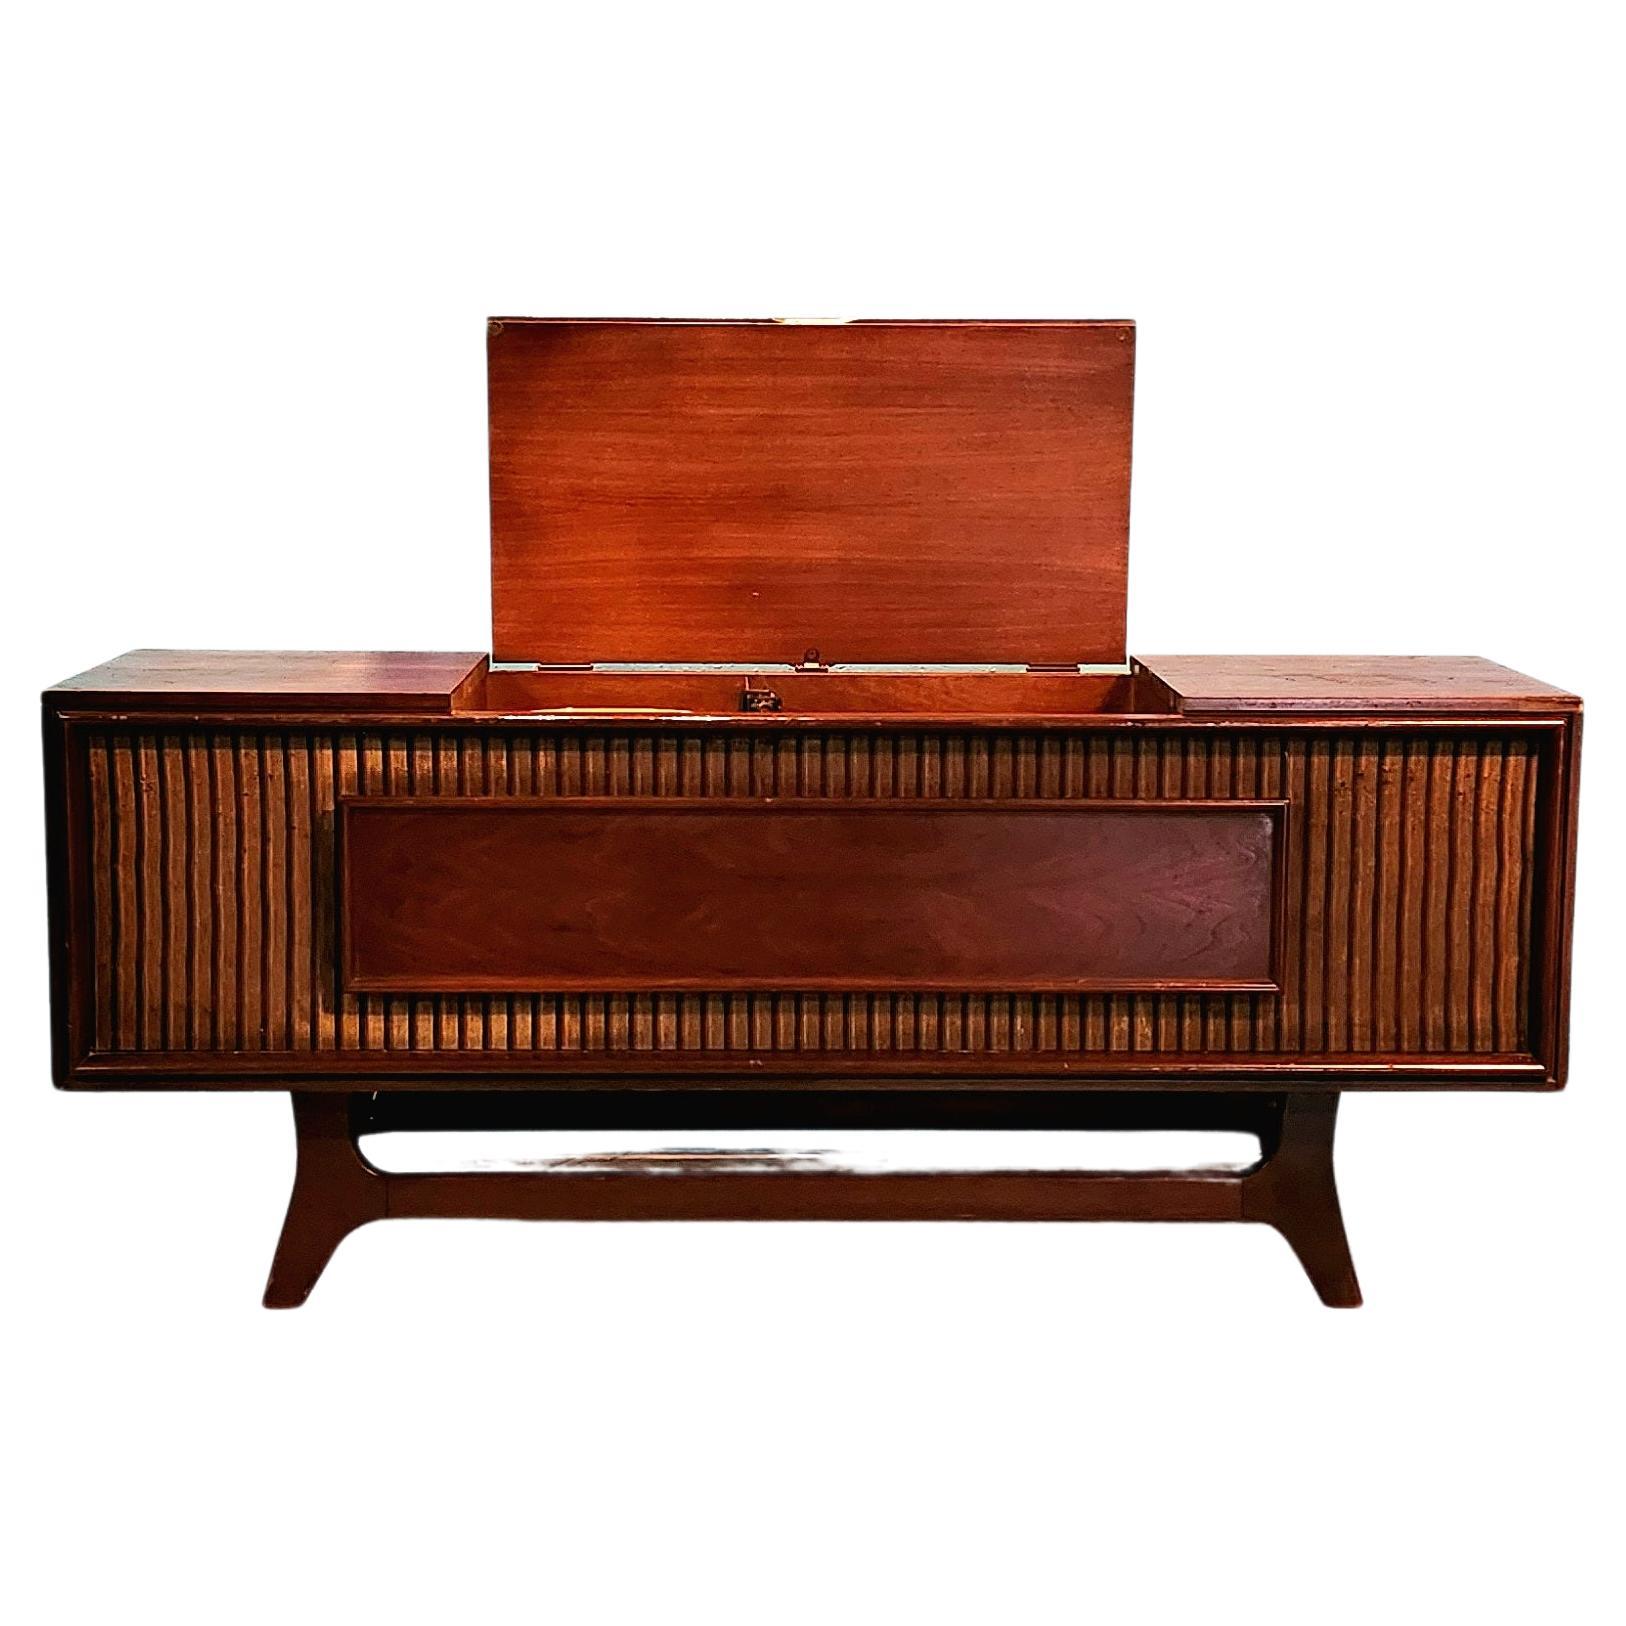 Radiogram Stereo Record Player "The Coffee Table Console Book" (vintage radios) For Sale